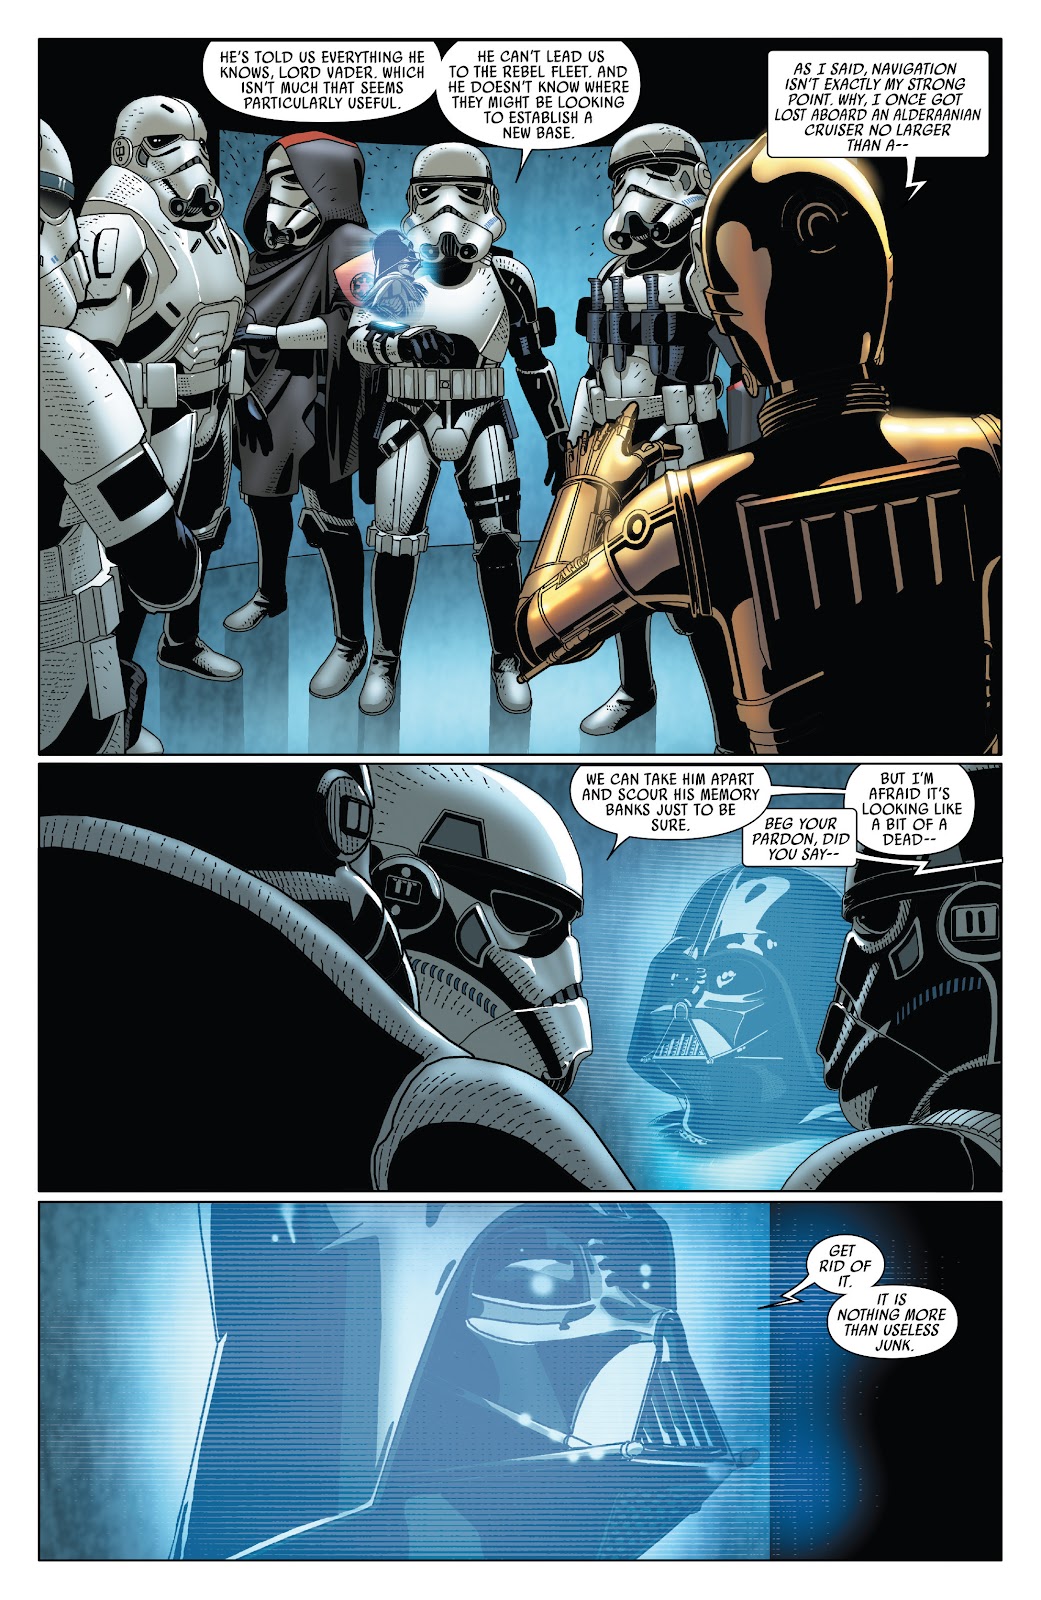 Star Wars (2015) issue 26 - Page 4